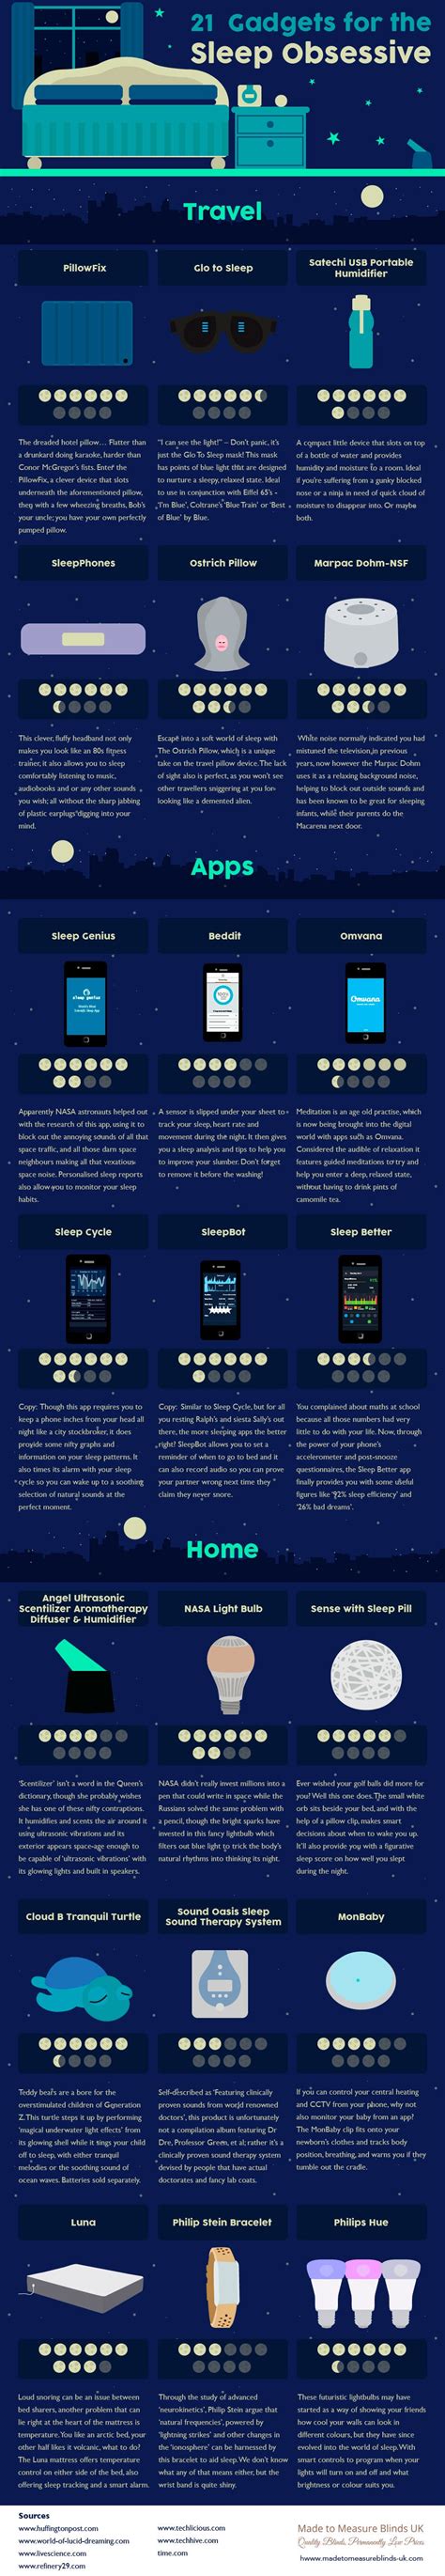 21 Gadgets That Could Help You Sleep Better Infographic